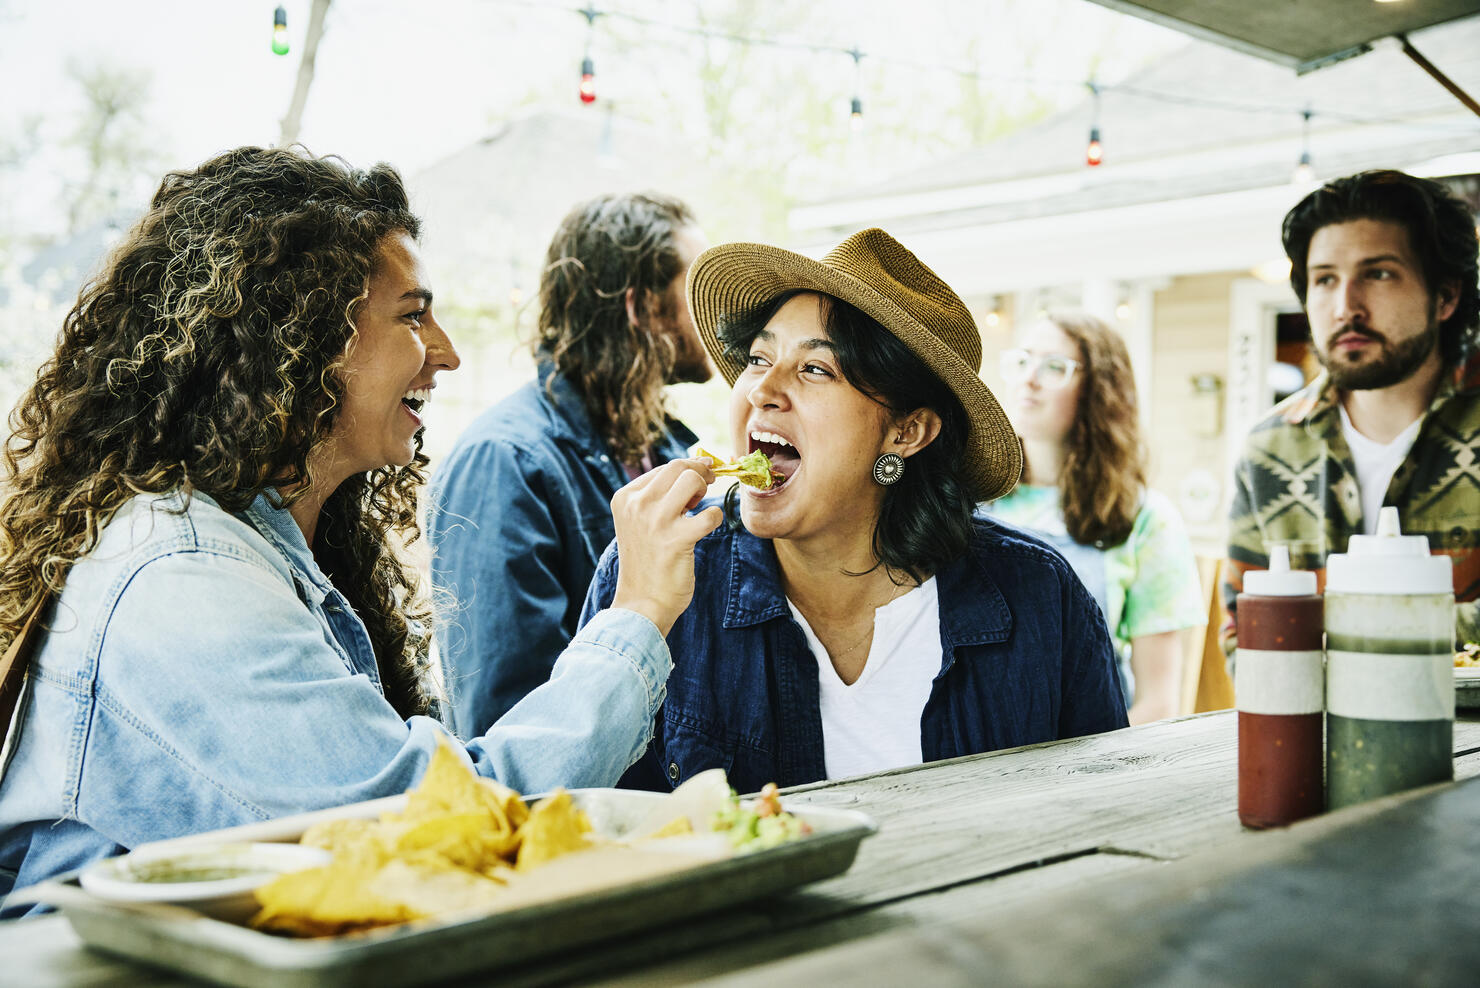 Medium shot of laughing woman feeding friend chip with guacamole while eating at food truck